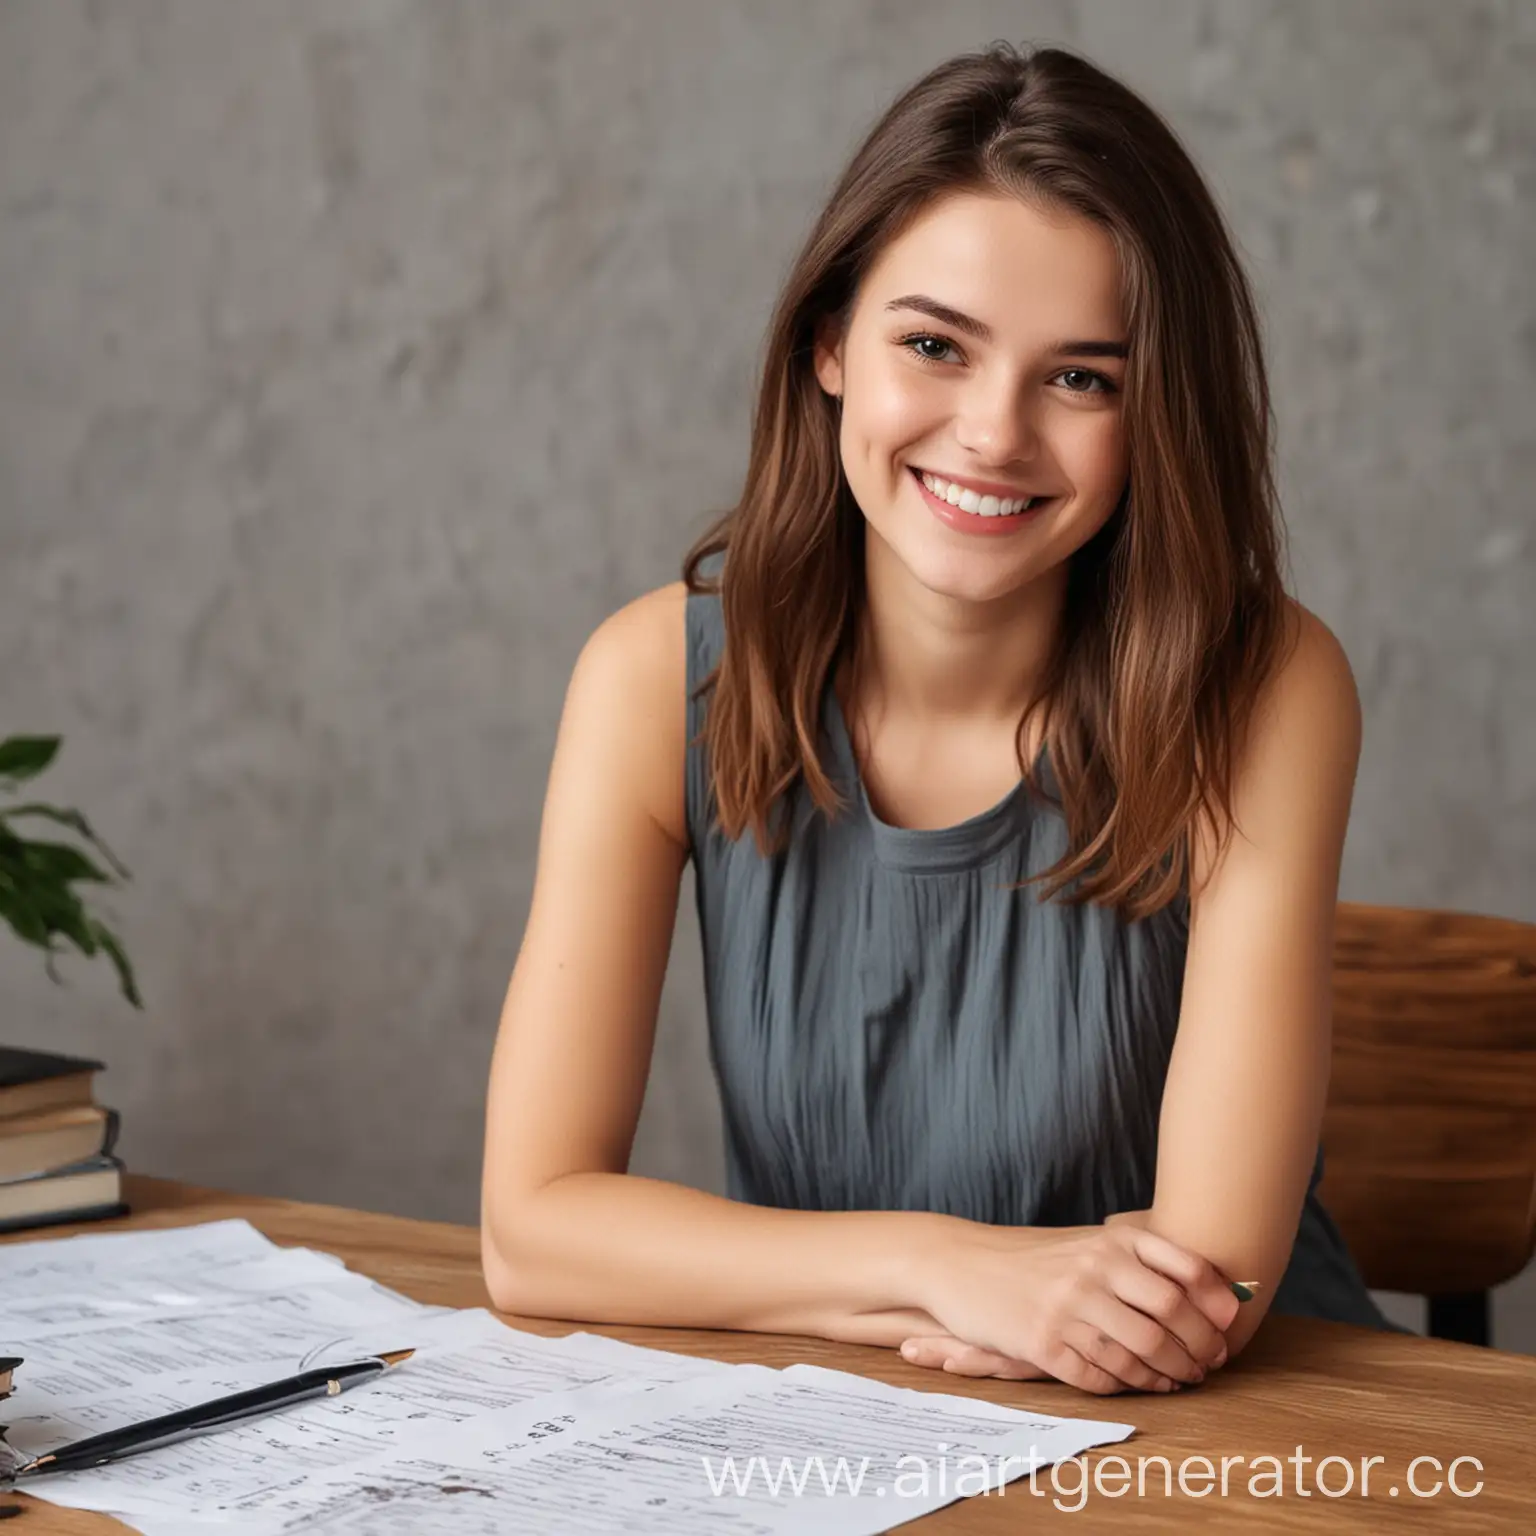 Psychologist-Girl-Smiling-at-Table